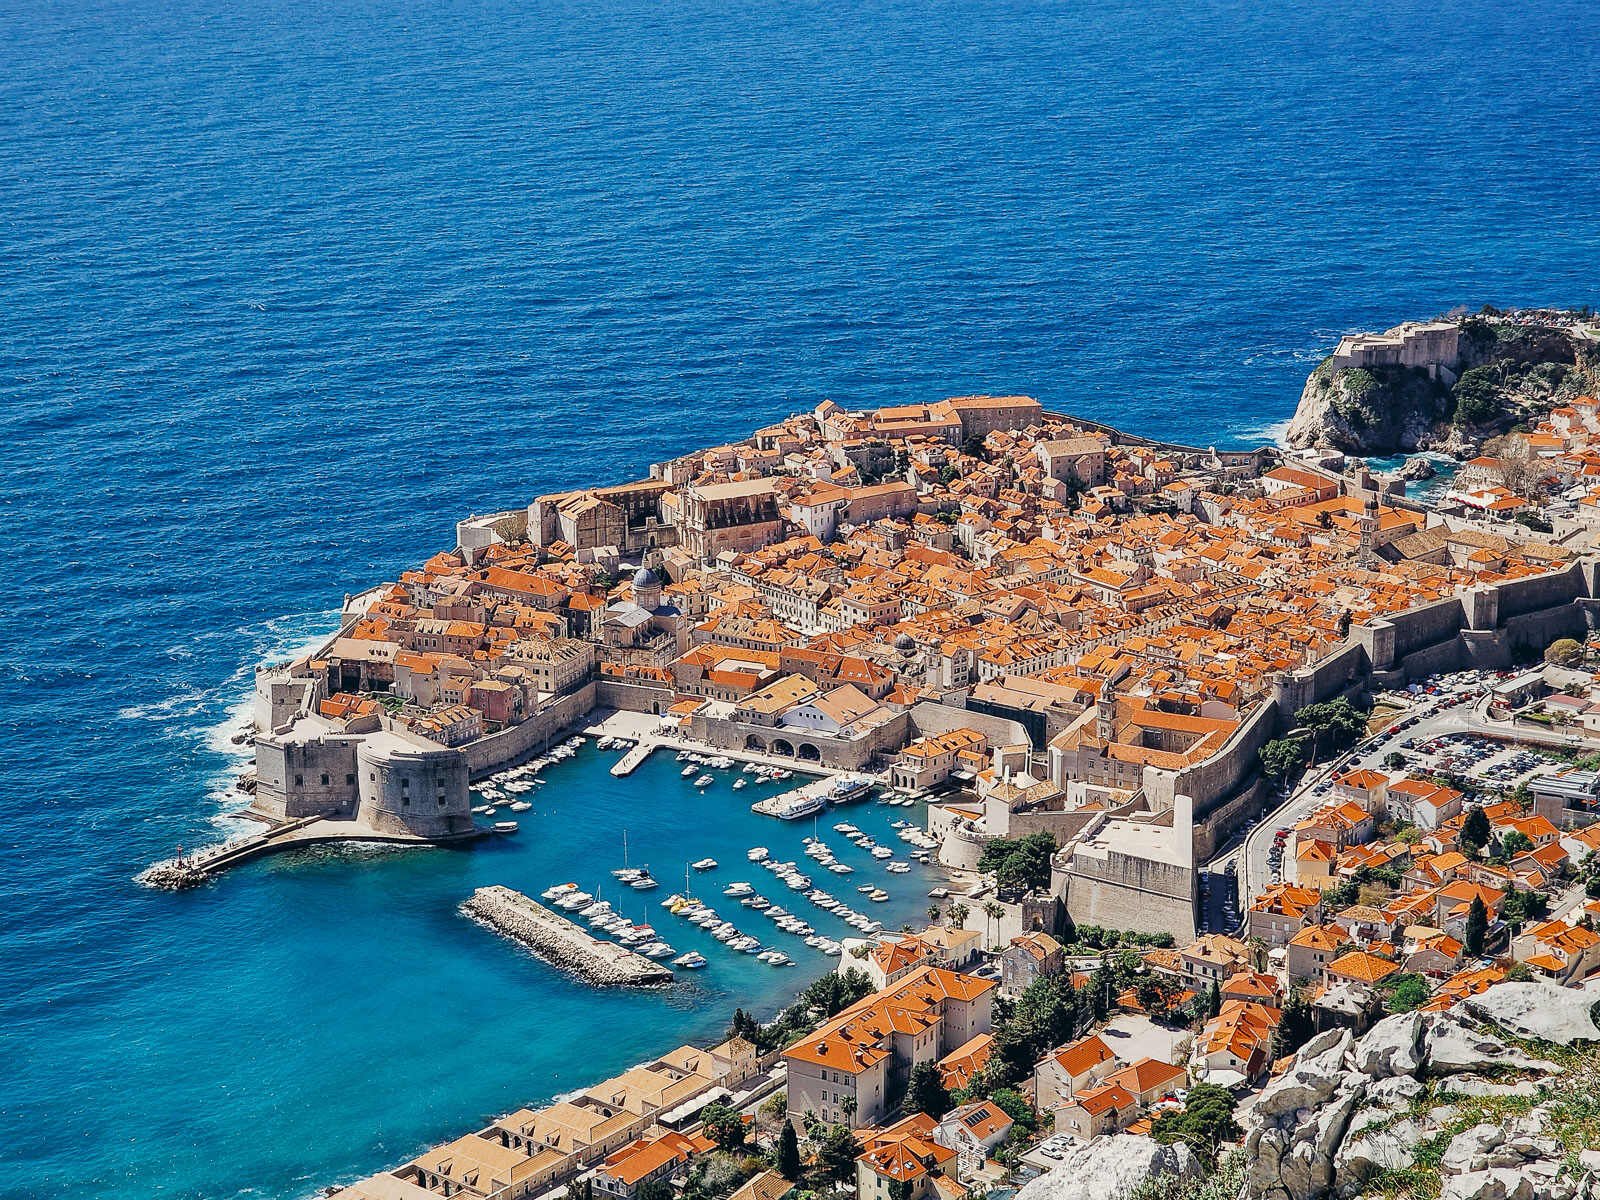 a view from above of the walled city of dubrovnik surrounded by blue sea